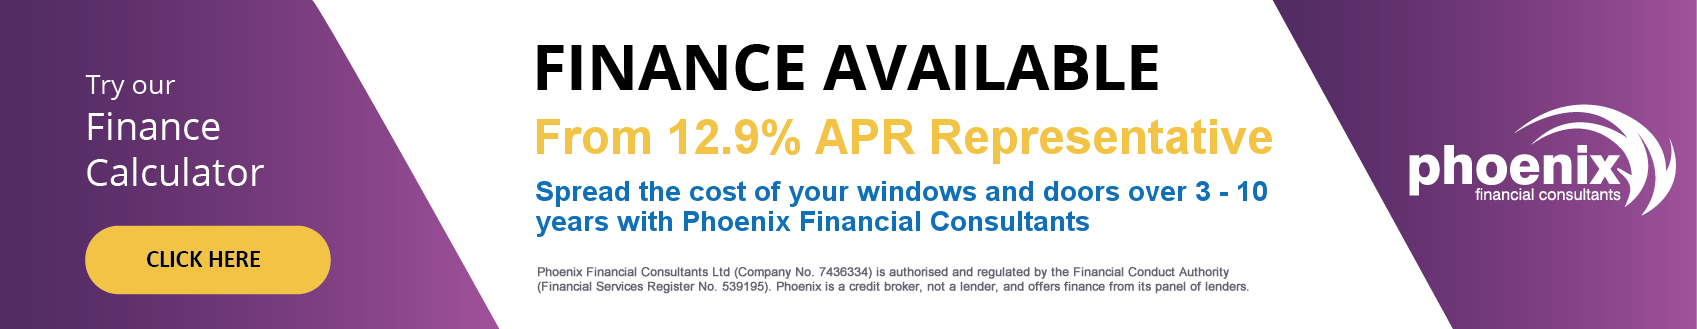 Phoenix Finance Available for Windows and Doors